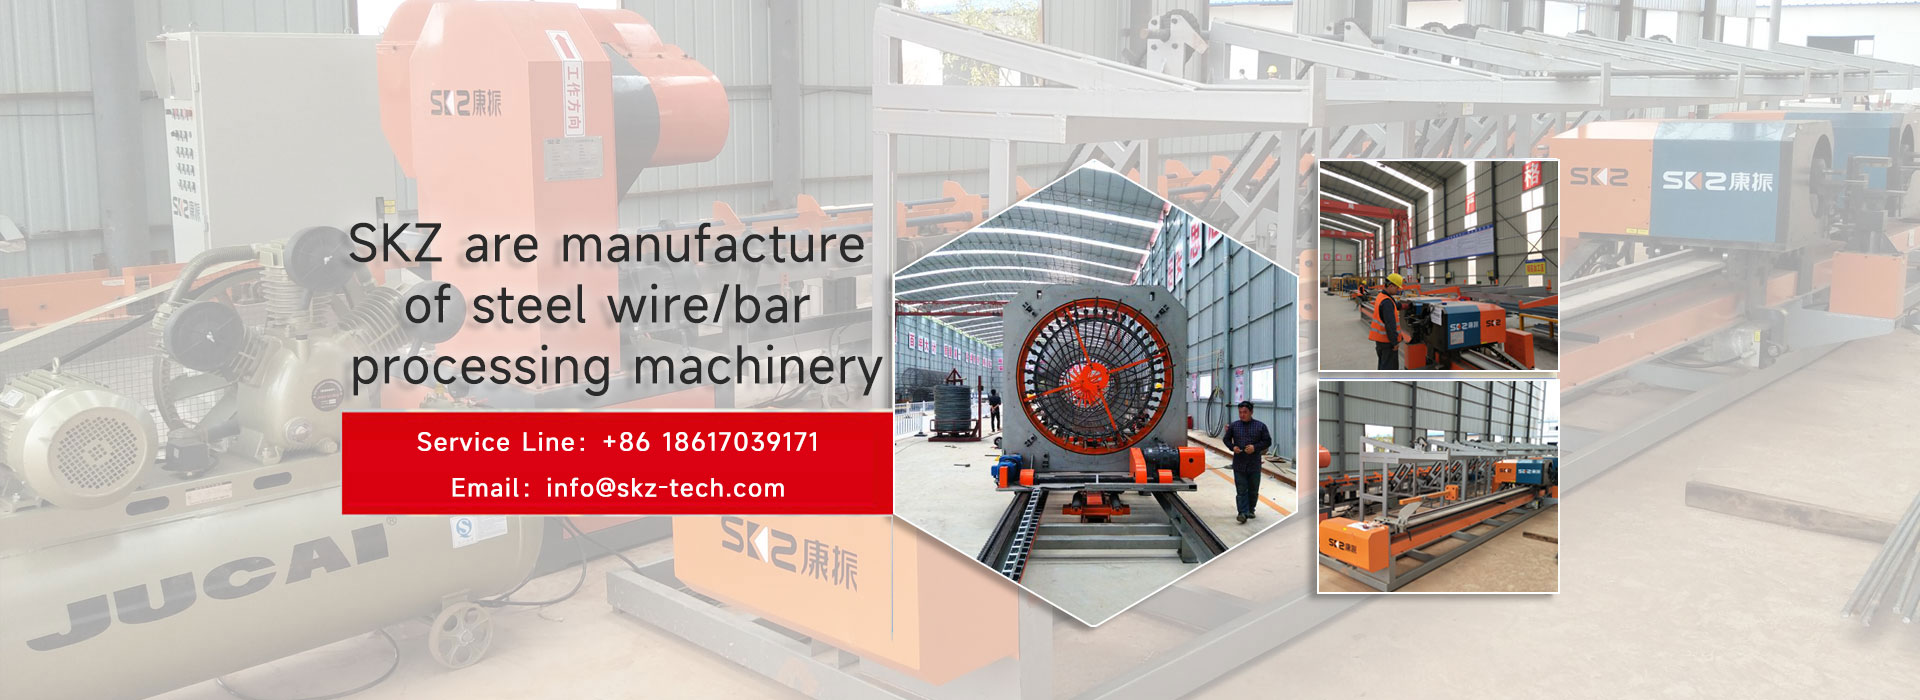 SKZ are manufacture of steel wire/bar processing machinery.